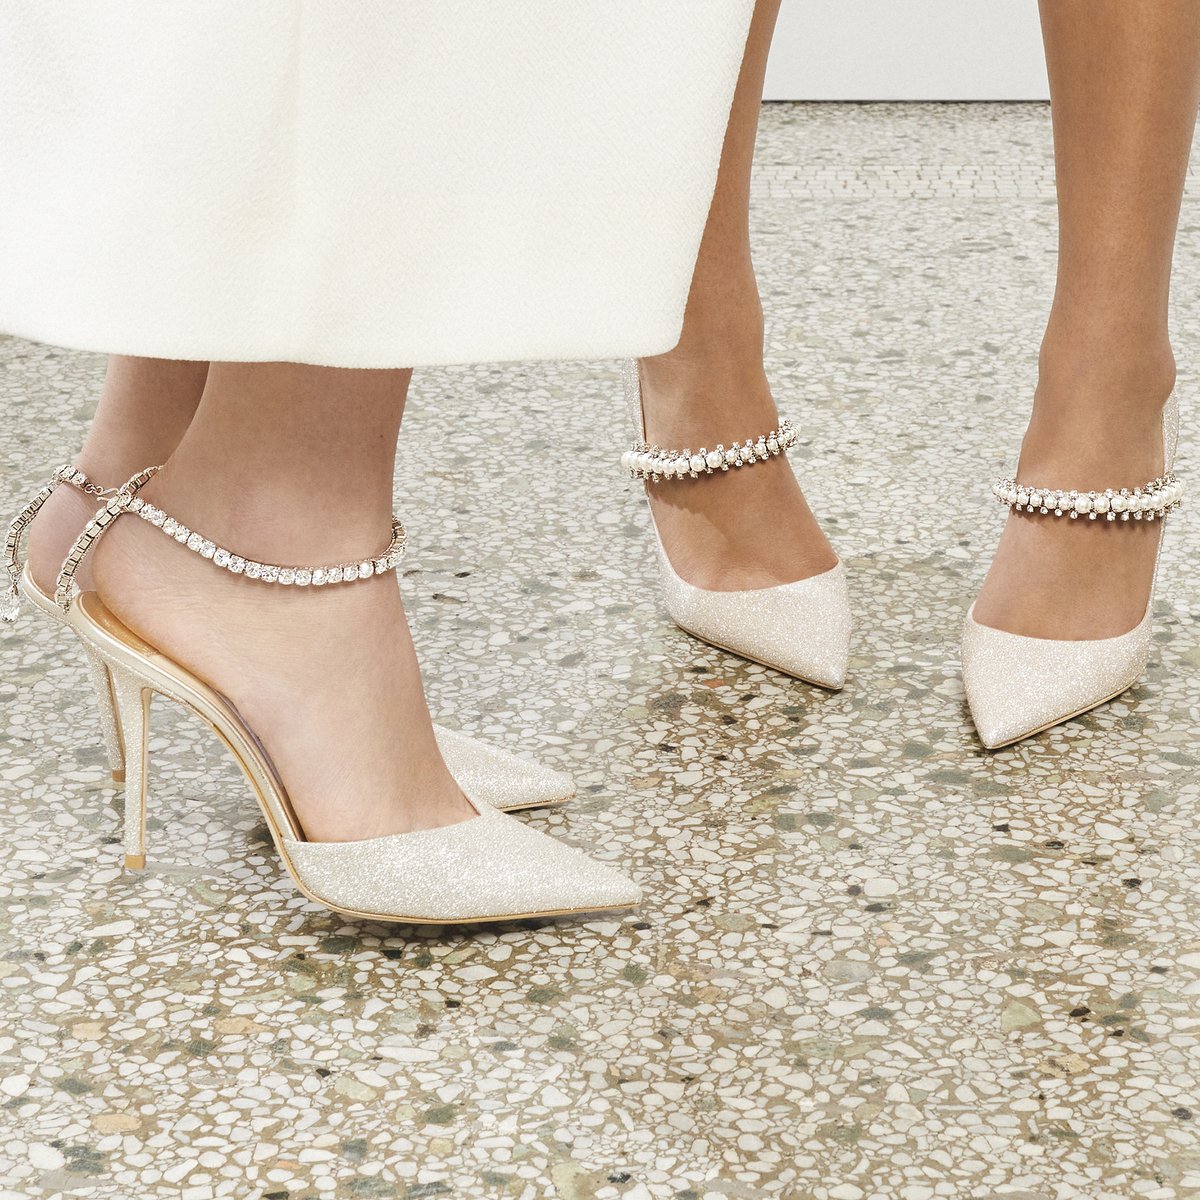 Explore our bridal collection and make your day truly unforgettable. Featuring SAEDA and BAILY #IDOINCHOO 

bit.ly/JimmyChoo_Brid…